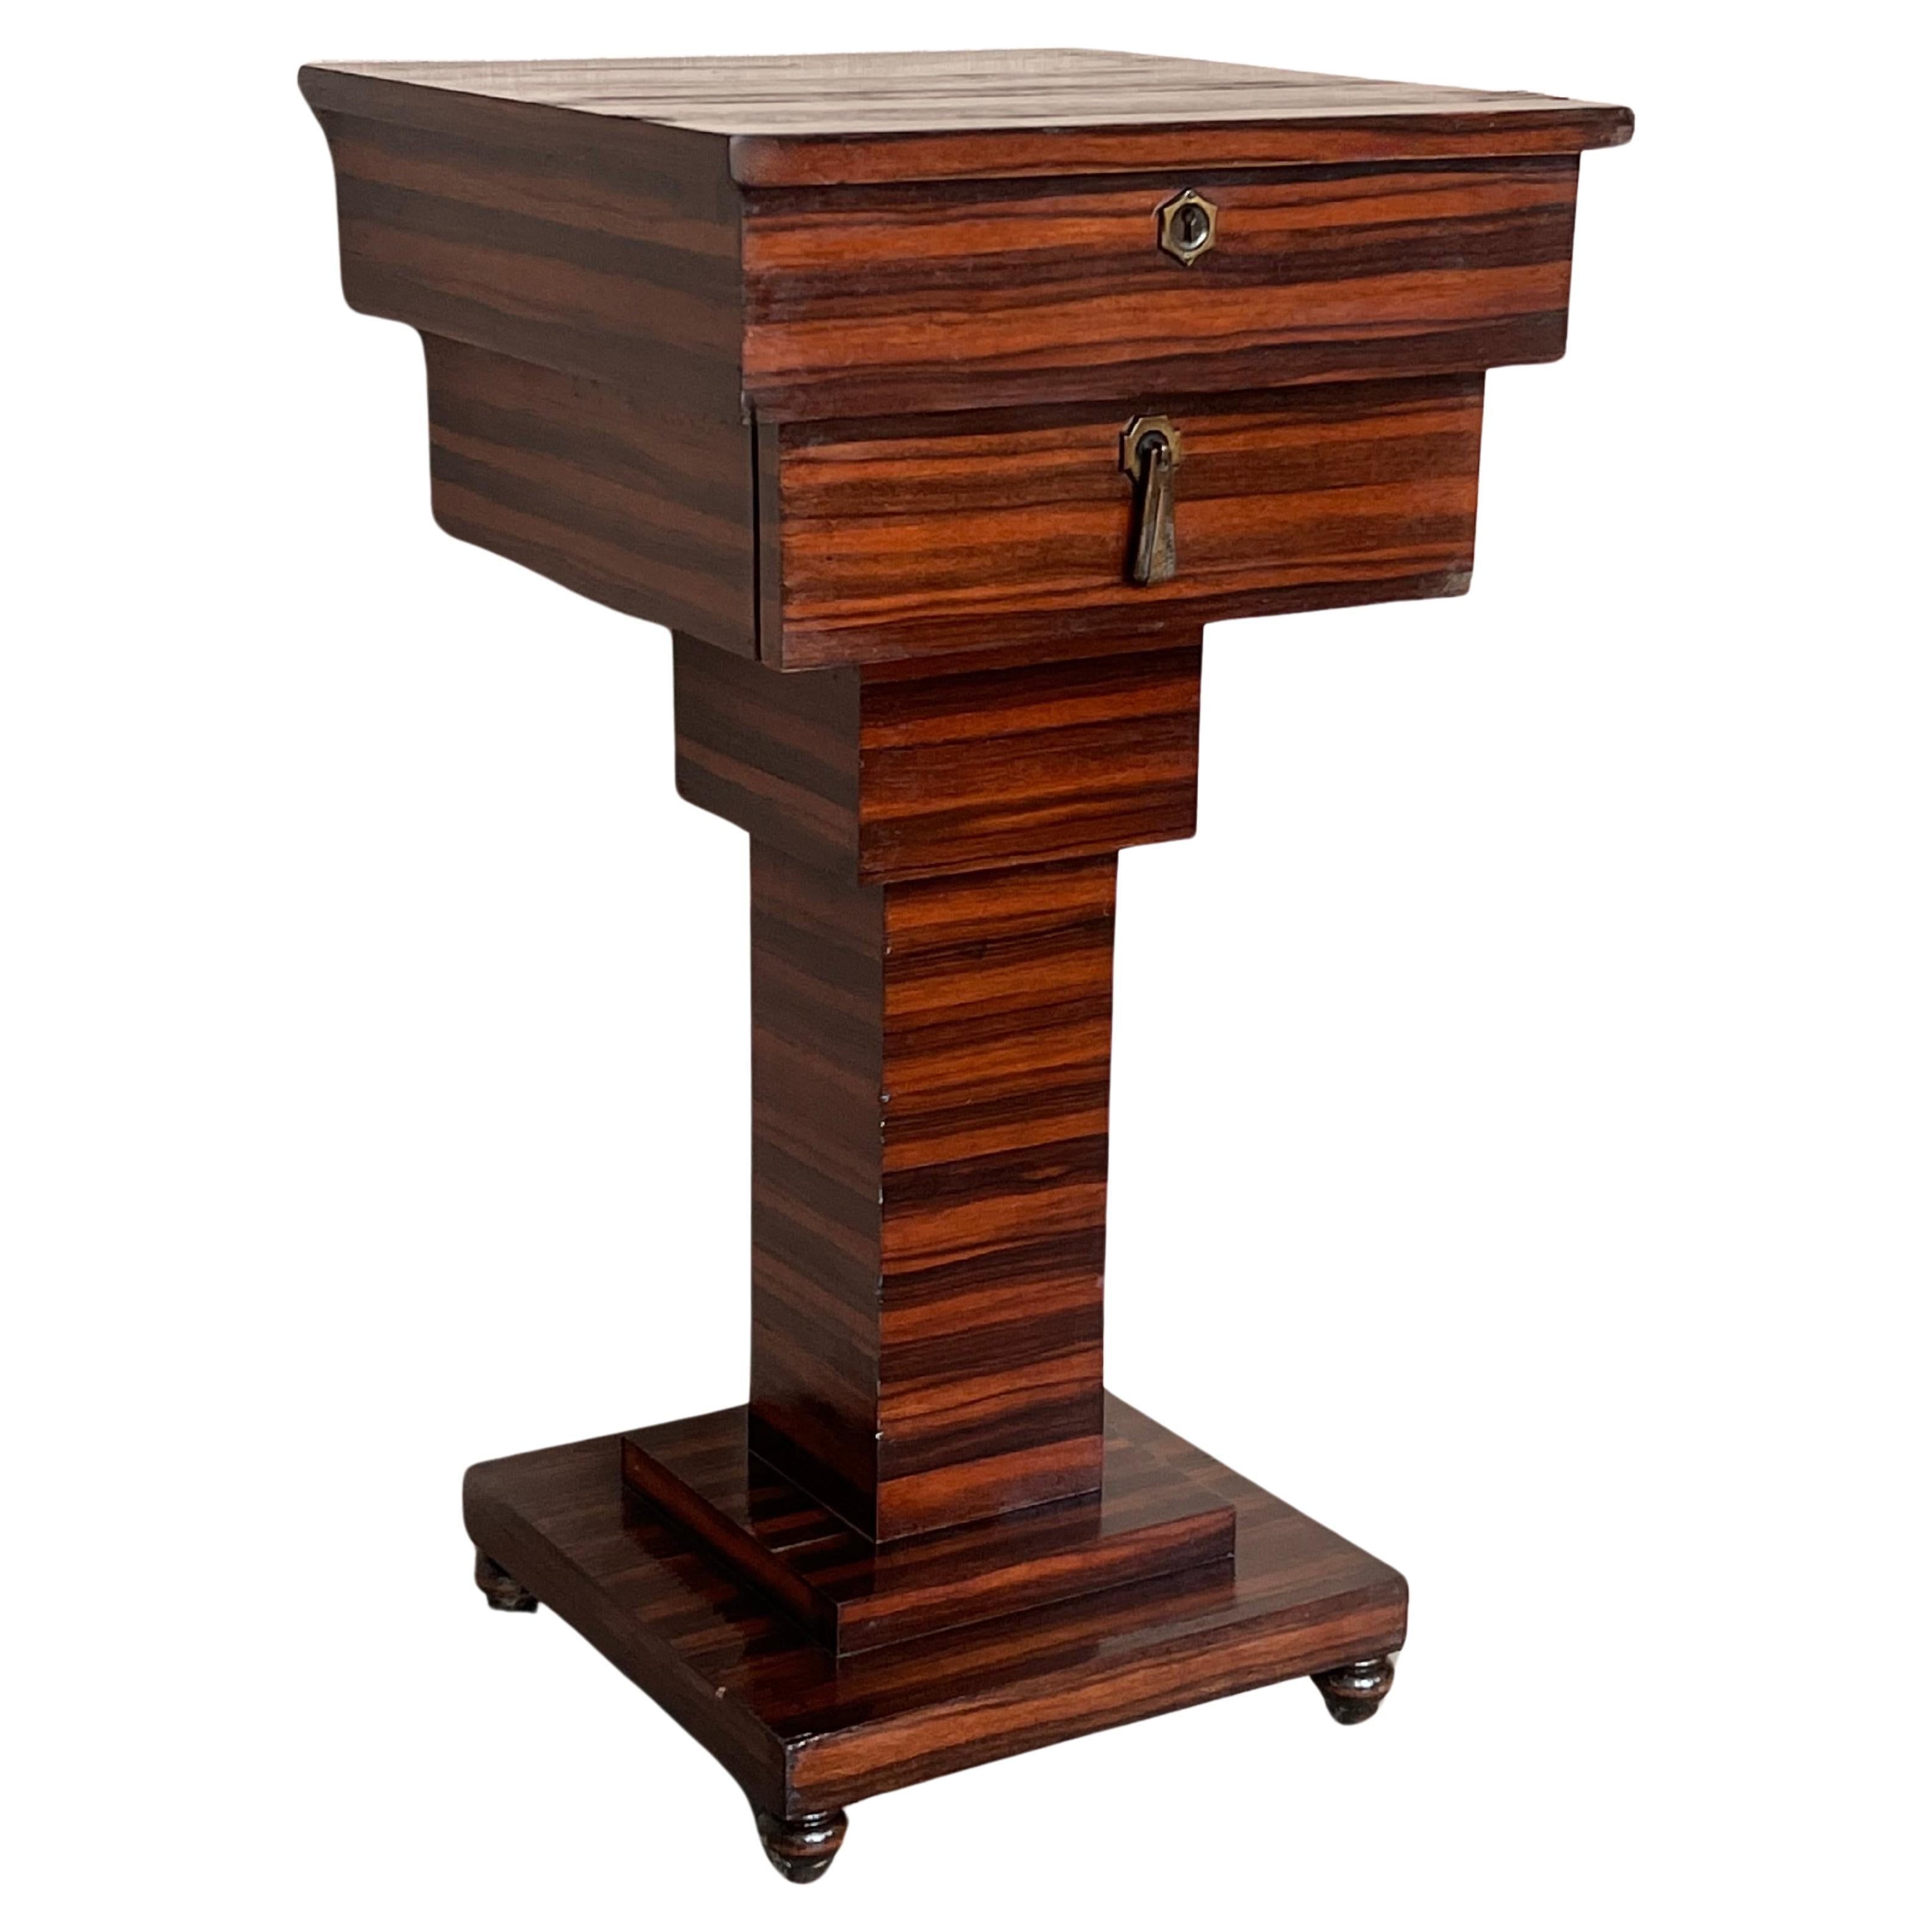 Mahogany Art Deco Sewing or Jelwery Box on Stand, circa 1860 For Sale